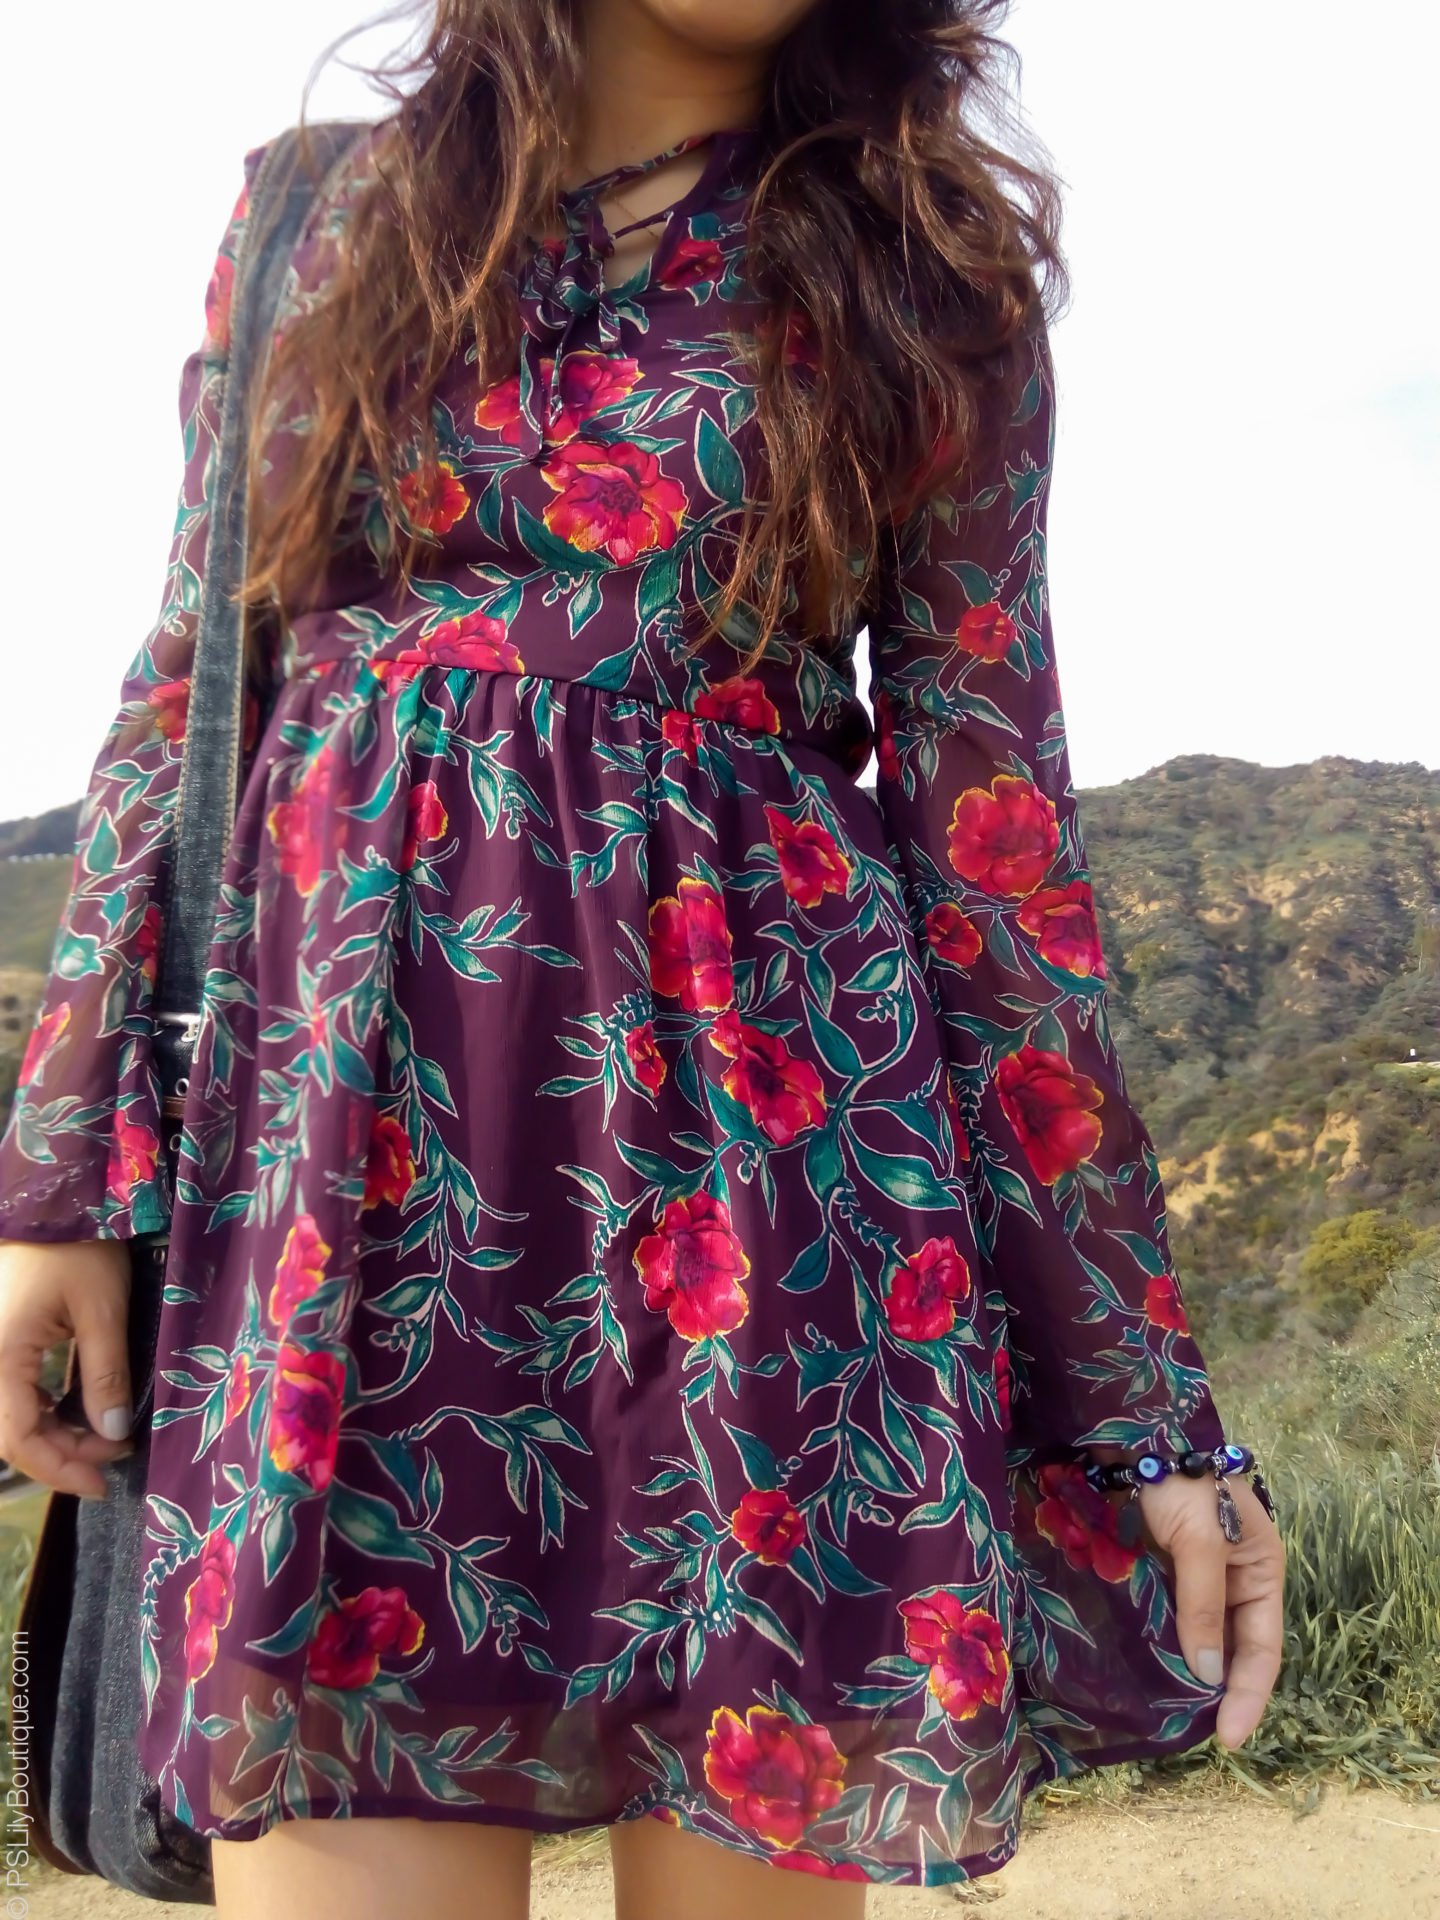 instagram-pslilyboutique-los-angeles-fashion-blogger-maroon-red-green-target-floral-dress-winter-2017-outfit-ideas-3-3-17